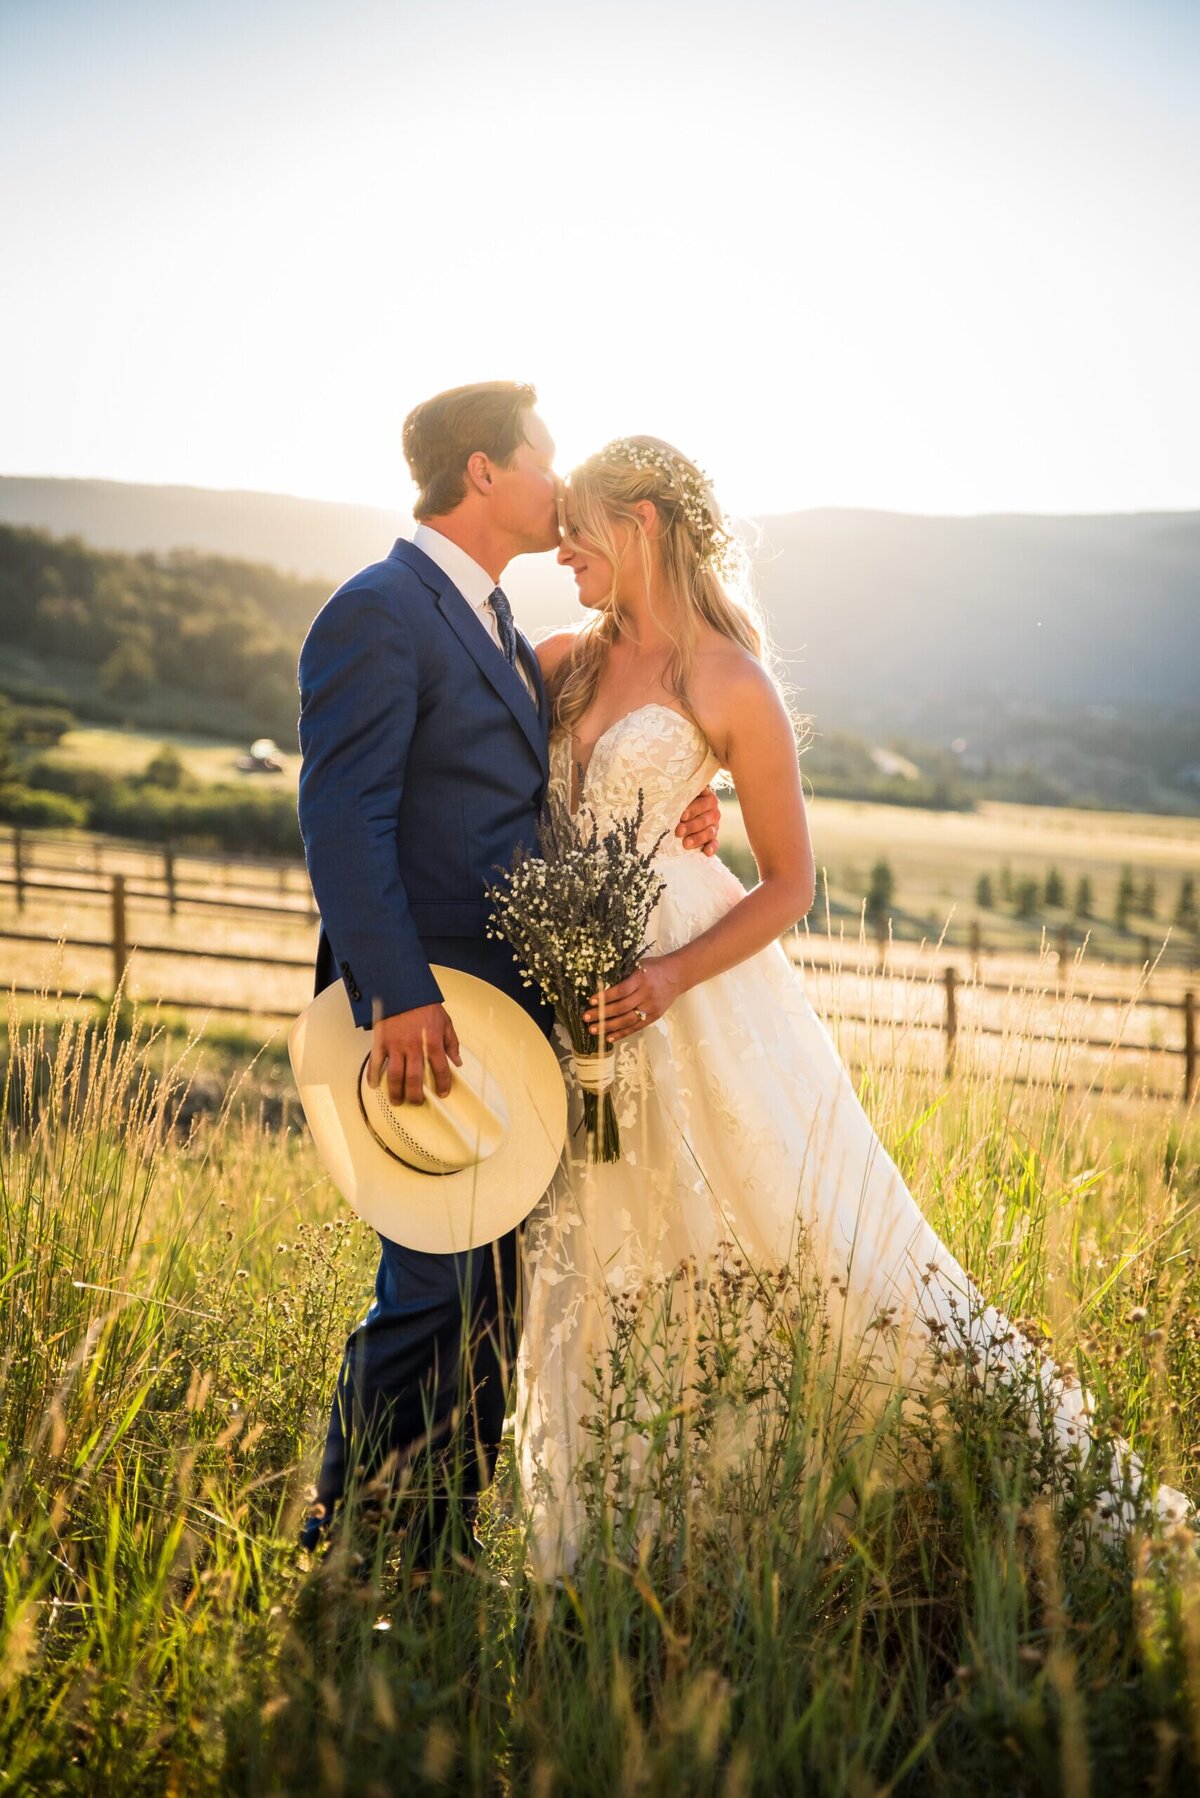 A groom holds his cowboy hat as he kisses his bride's forehead at golden hour.